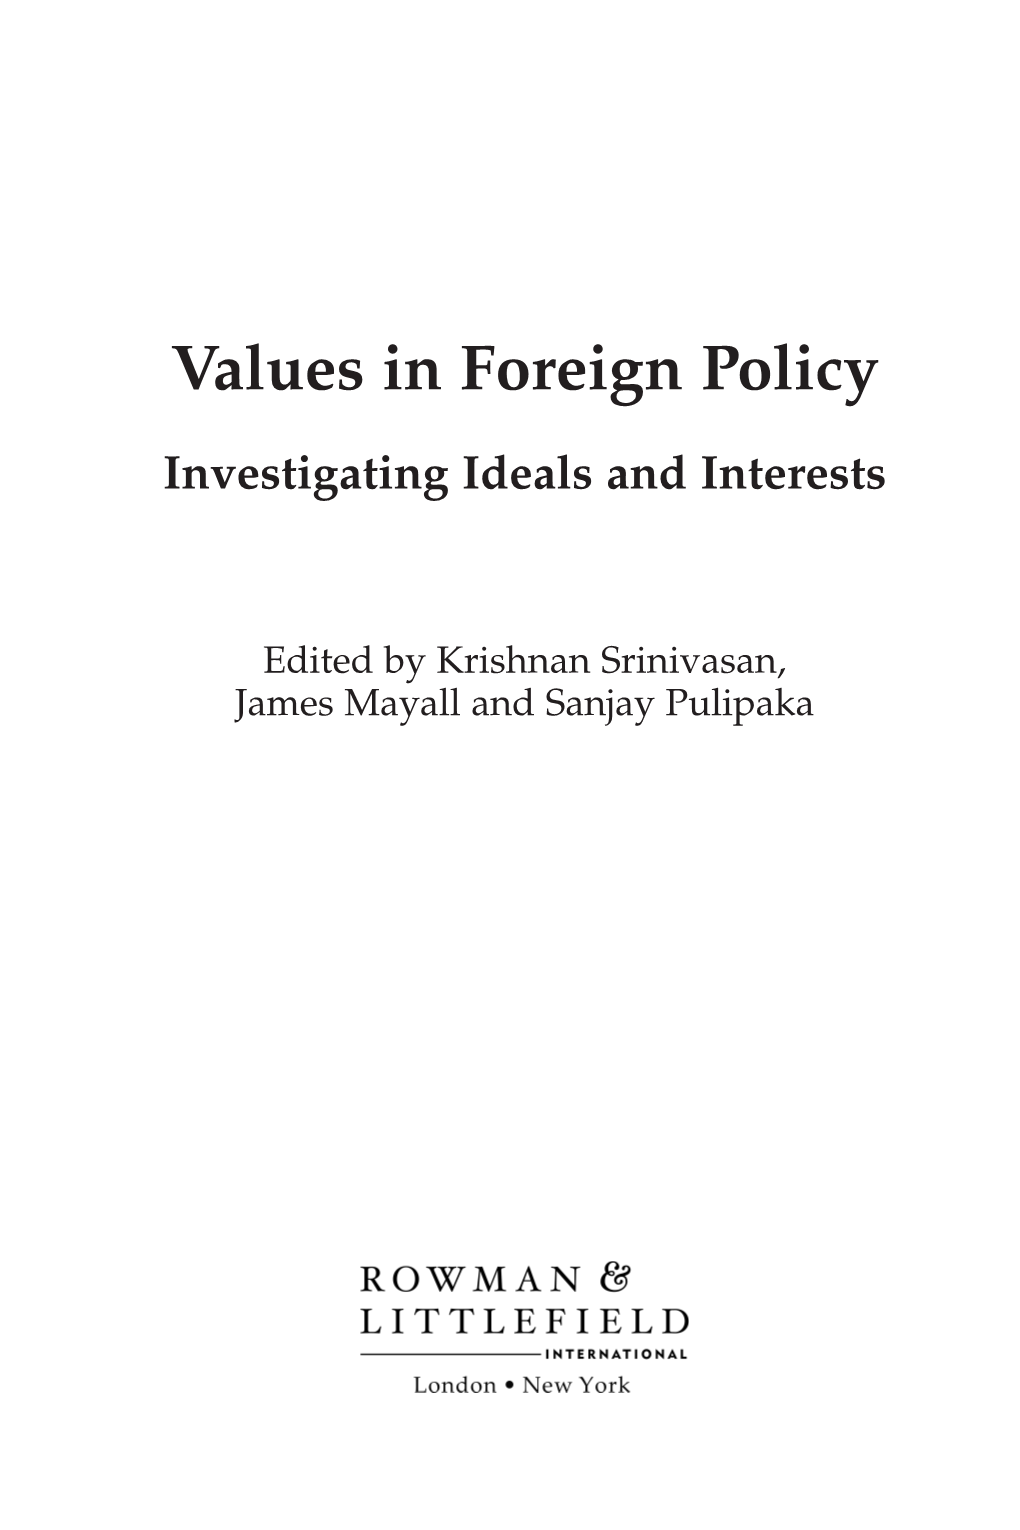 Islamic Values in Foreign Policy Perspectives on ‘Secular’ Turkey and ‘Islamic’ Iran Mehmet Ozkan and Kingshuk Chatterjee